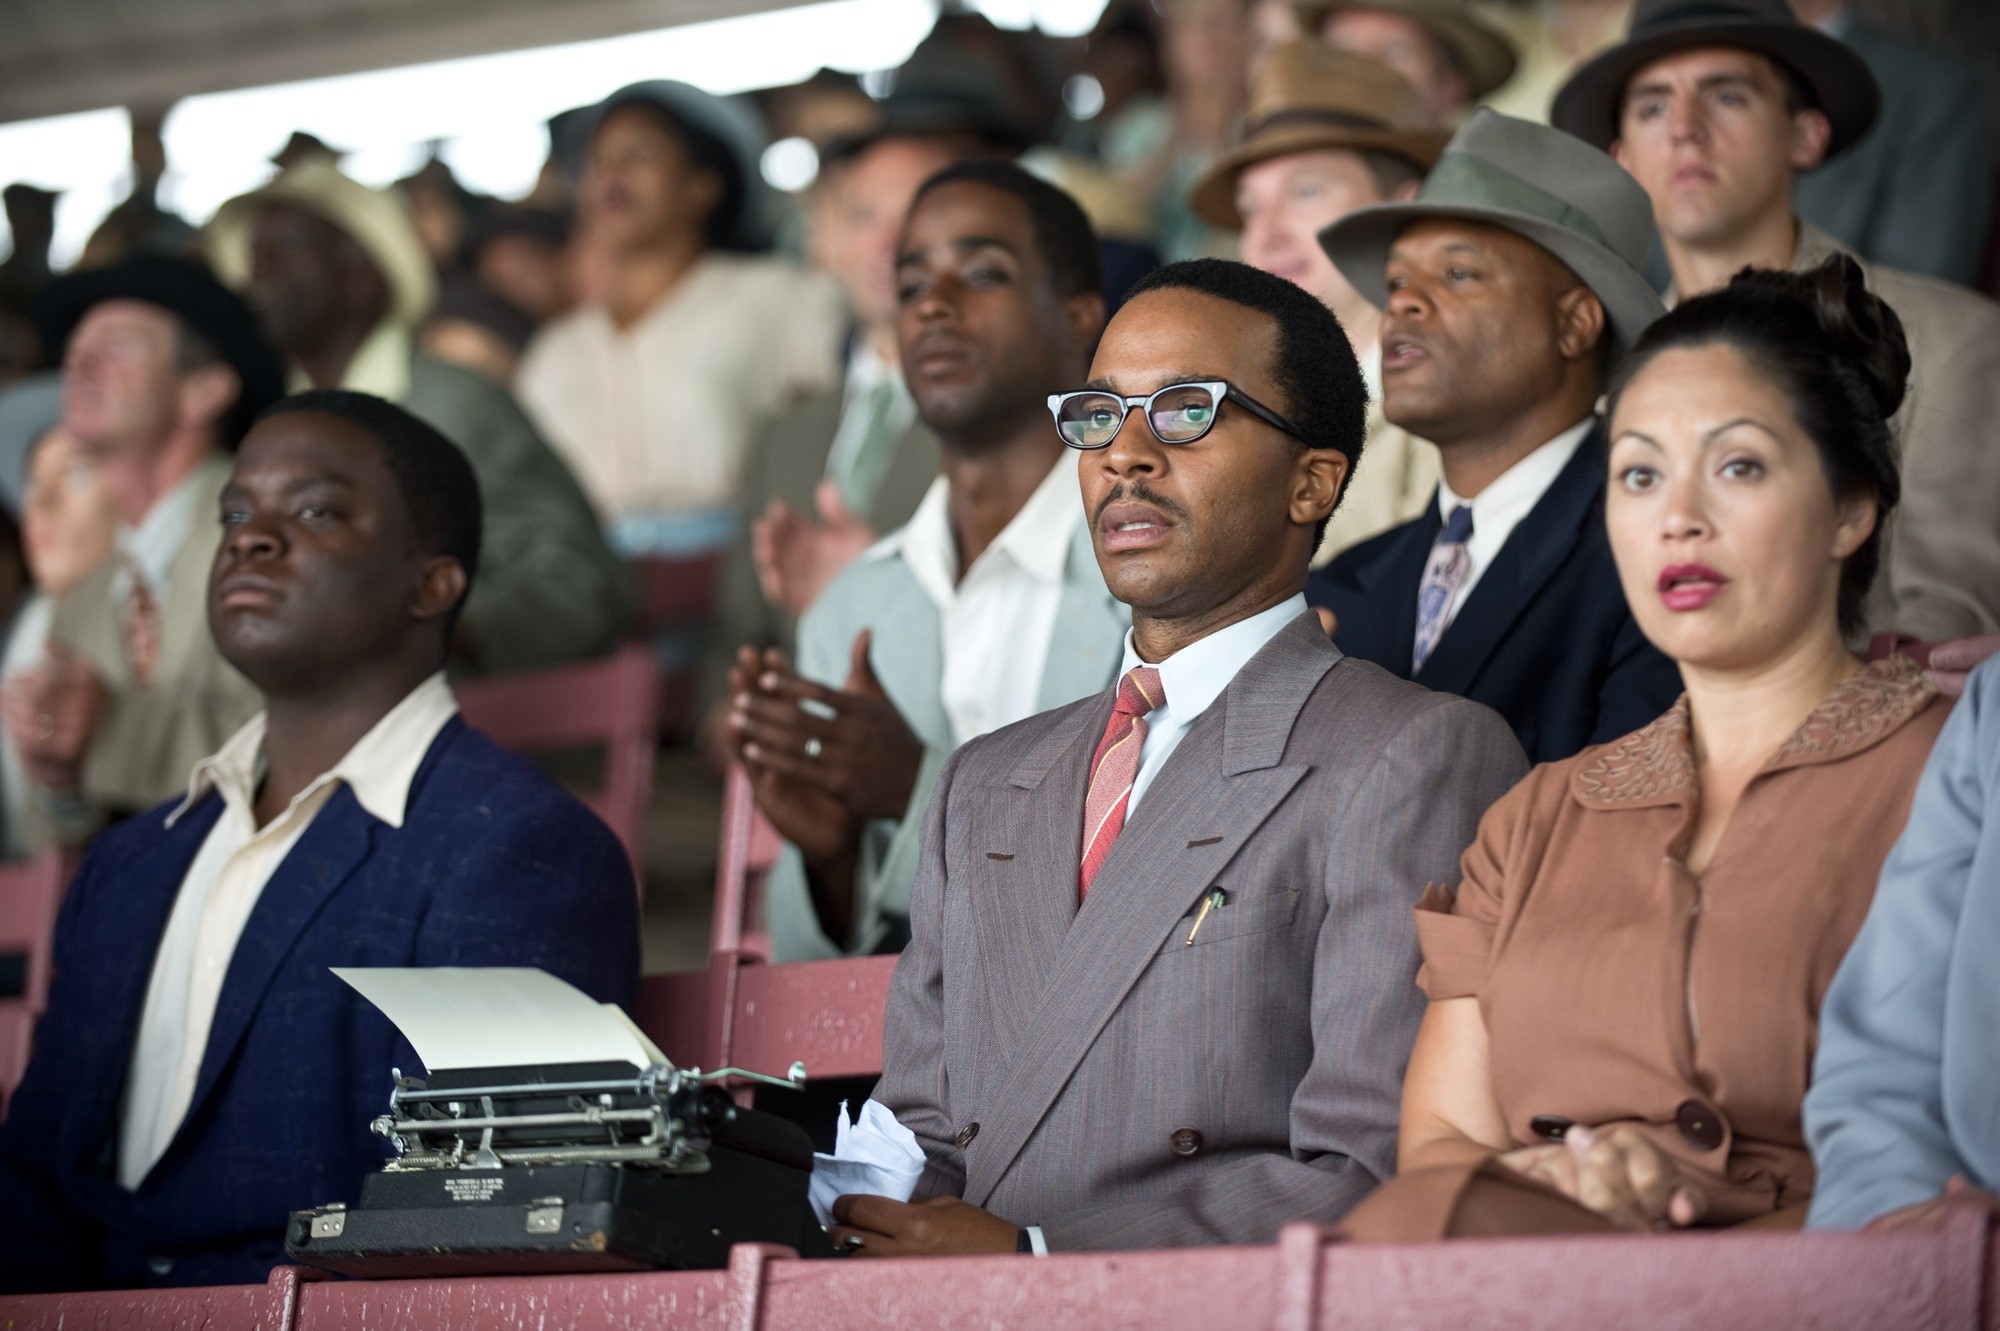 Andre Holland stars as Wendell Smith in Warner Bros. Pictures' 42 (2013)